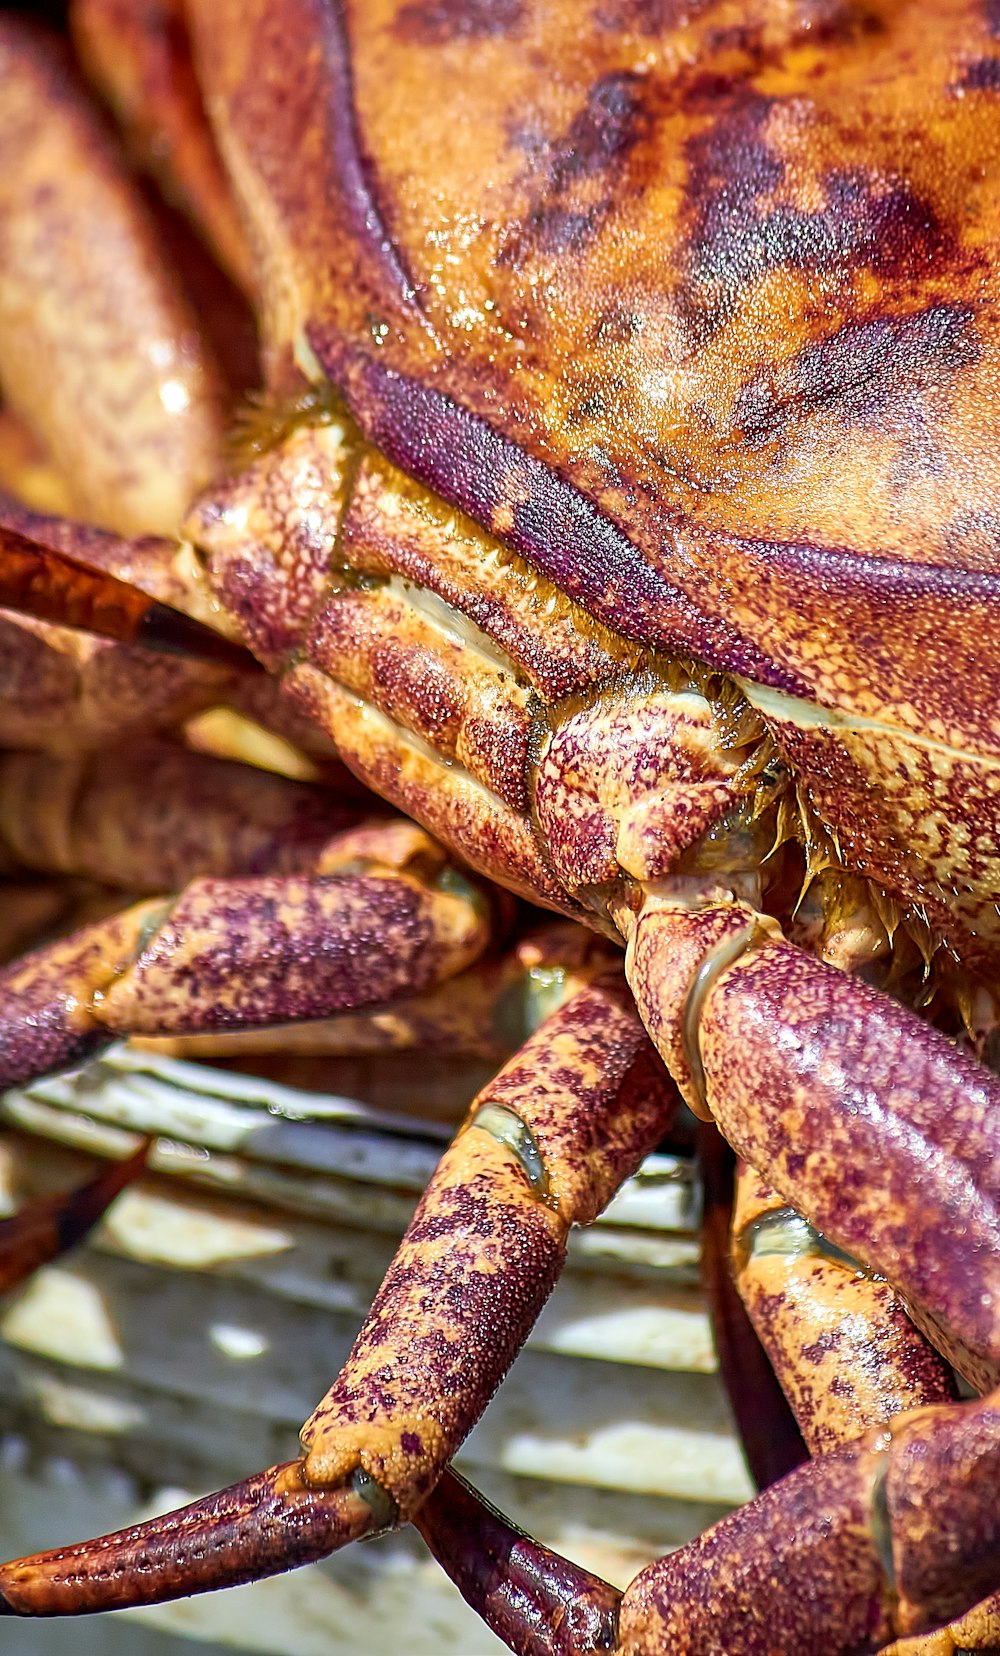 a close up of a crab in a bowl